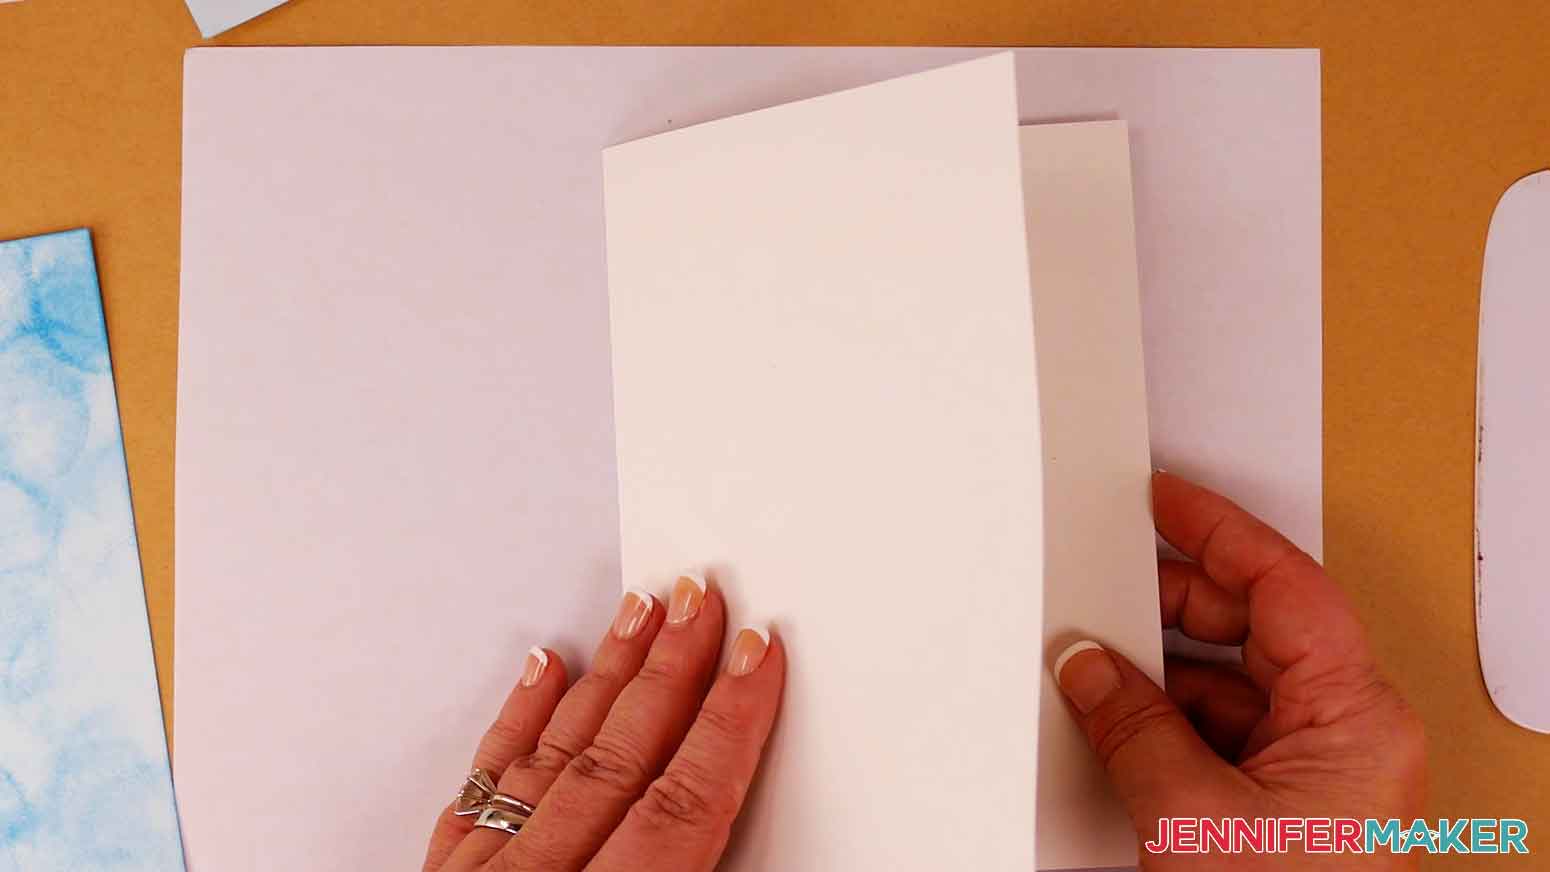 Fold the blank card piece in half along the dashed cut line.